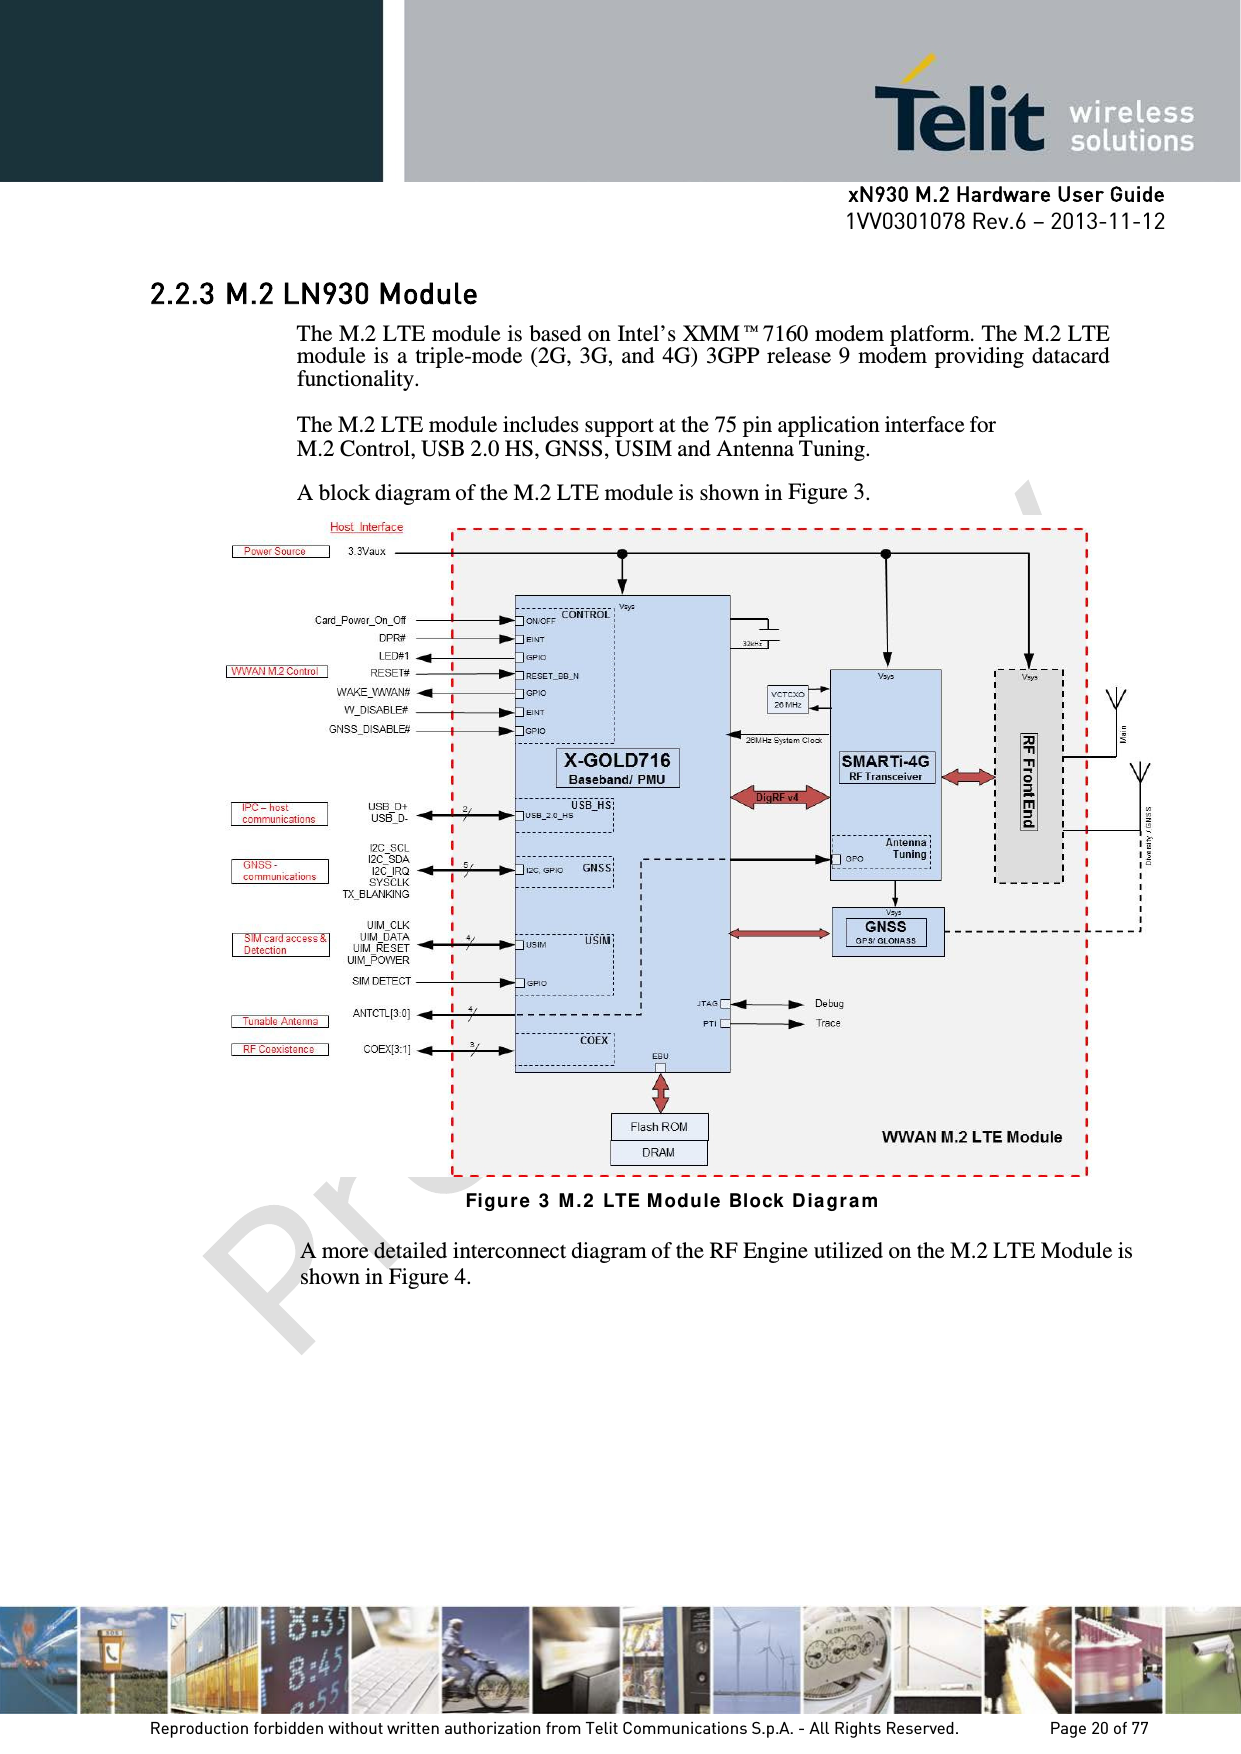      xN930 M.2 Hardware User Guide 1VV0301078 Rev.6 – 2013-11-12    2.2.3 M.2 LN930 Module The M.2 LTE module is based on Intel’s XMM™7160 modem platform. The M.2 LTE module is a triple-mode (2G, 3G, and 4G) 3GPP release 9 modem providing datacard functionality.  The M.2 LTE module includes support at the 75 pin application interface for M.2 Control, USB 2.0 HS, GNSS, USIM and Antenna Tuning.  A block diagram of the M.2 LTE module is shown in Figure 3.  Figur e 3  M .2  LTE M odu le  Block Dia gr a m  A more detailed interconnect diagram of the RF Engine utilized on the M.2 LTE Module is shown in Figure 4.    Reproduction forbidden without written authorization from Telit Communications S.p.A. - All Rights Reserved.    Page 20 of 77 